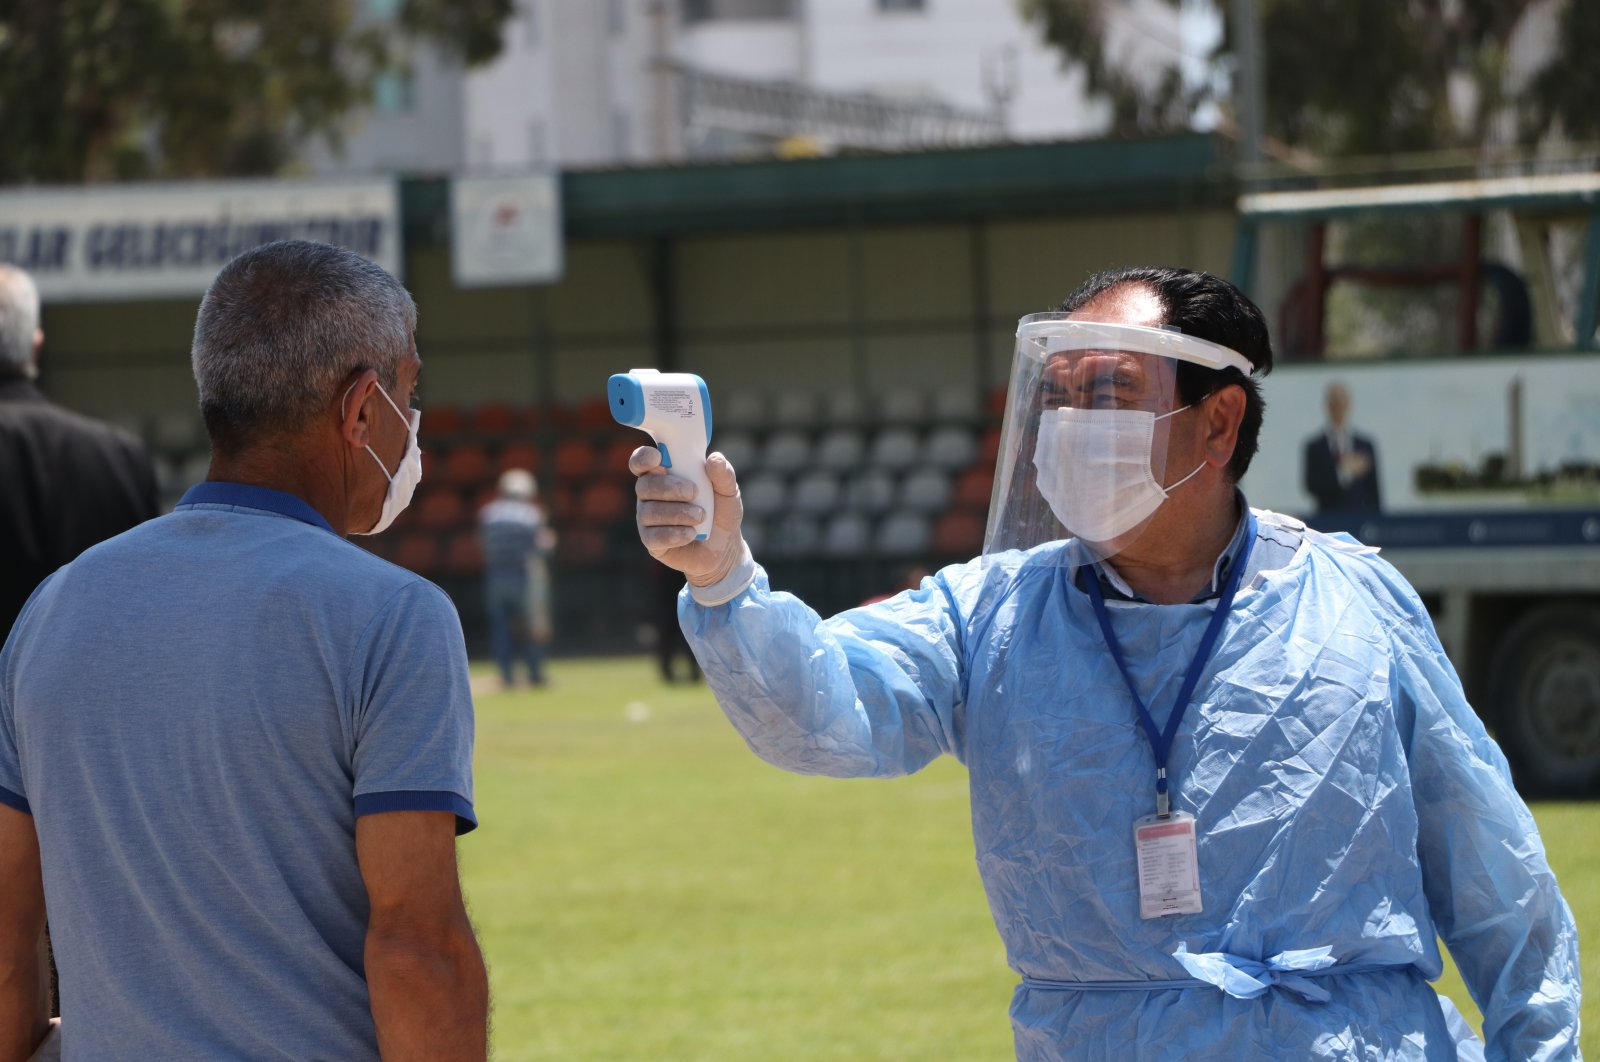 An official measures temperature of a citizen before Friday prayer in a stadium, Mersin, on May 29, 2020. (IHA Photo)